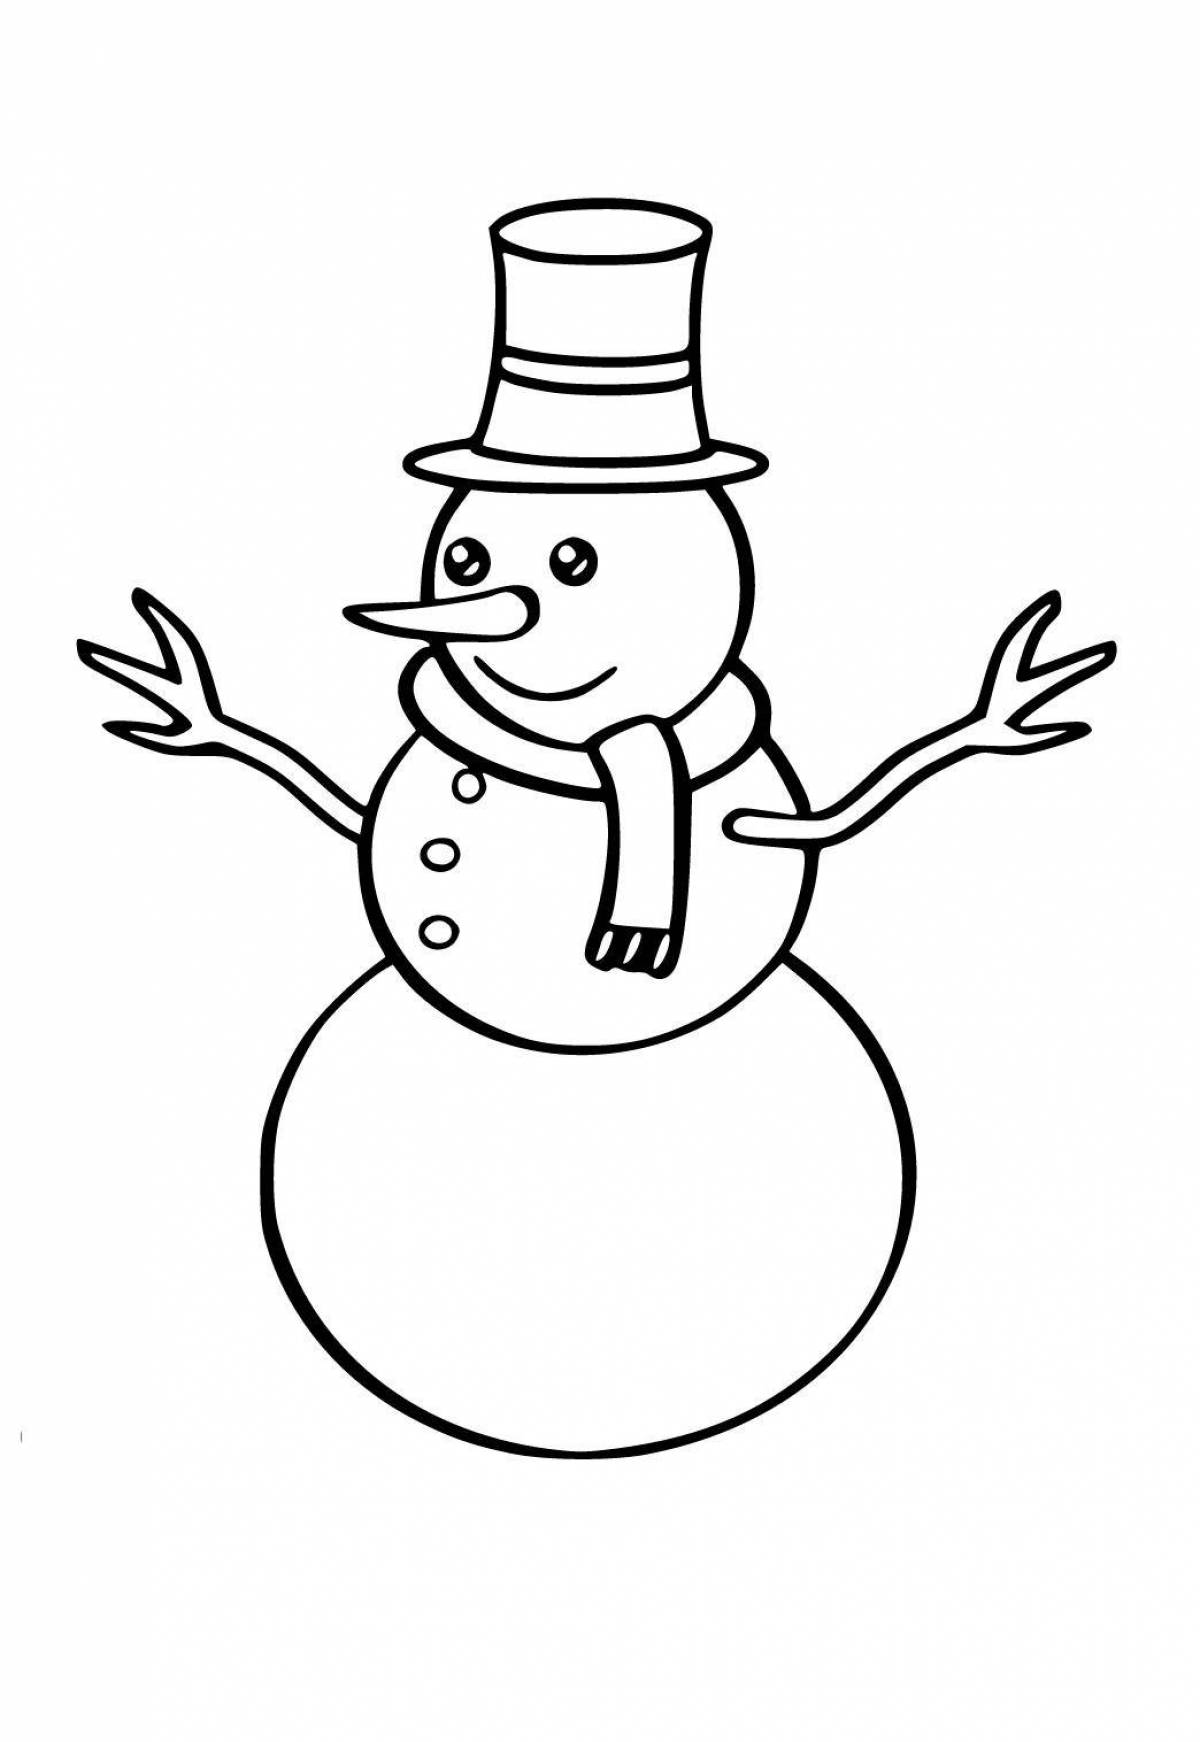 Snowman for children 2 3 years old #1